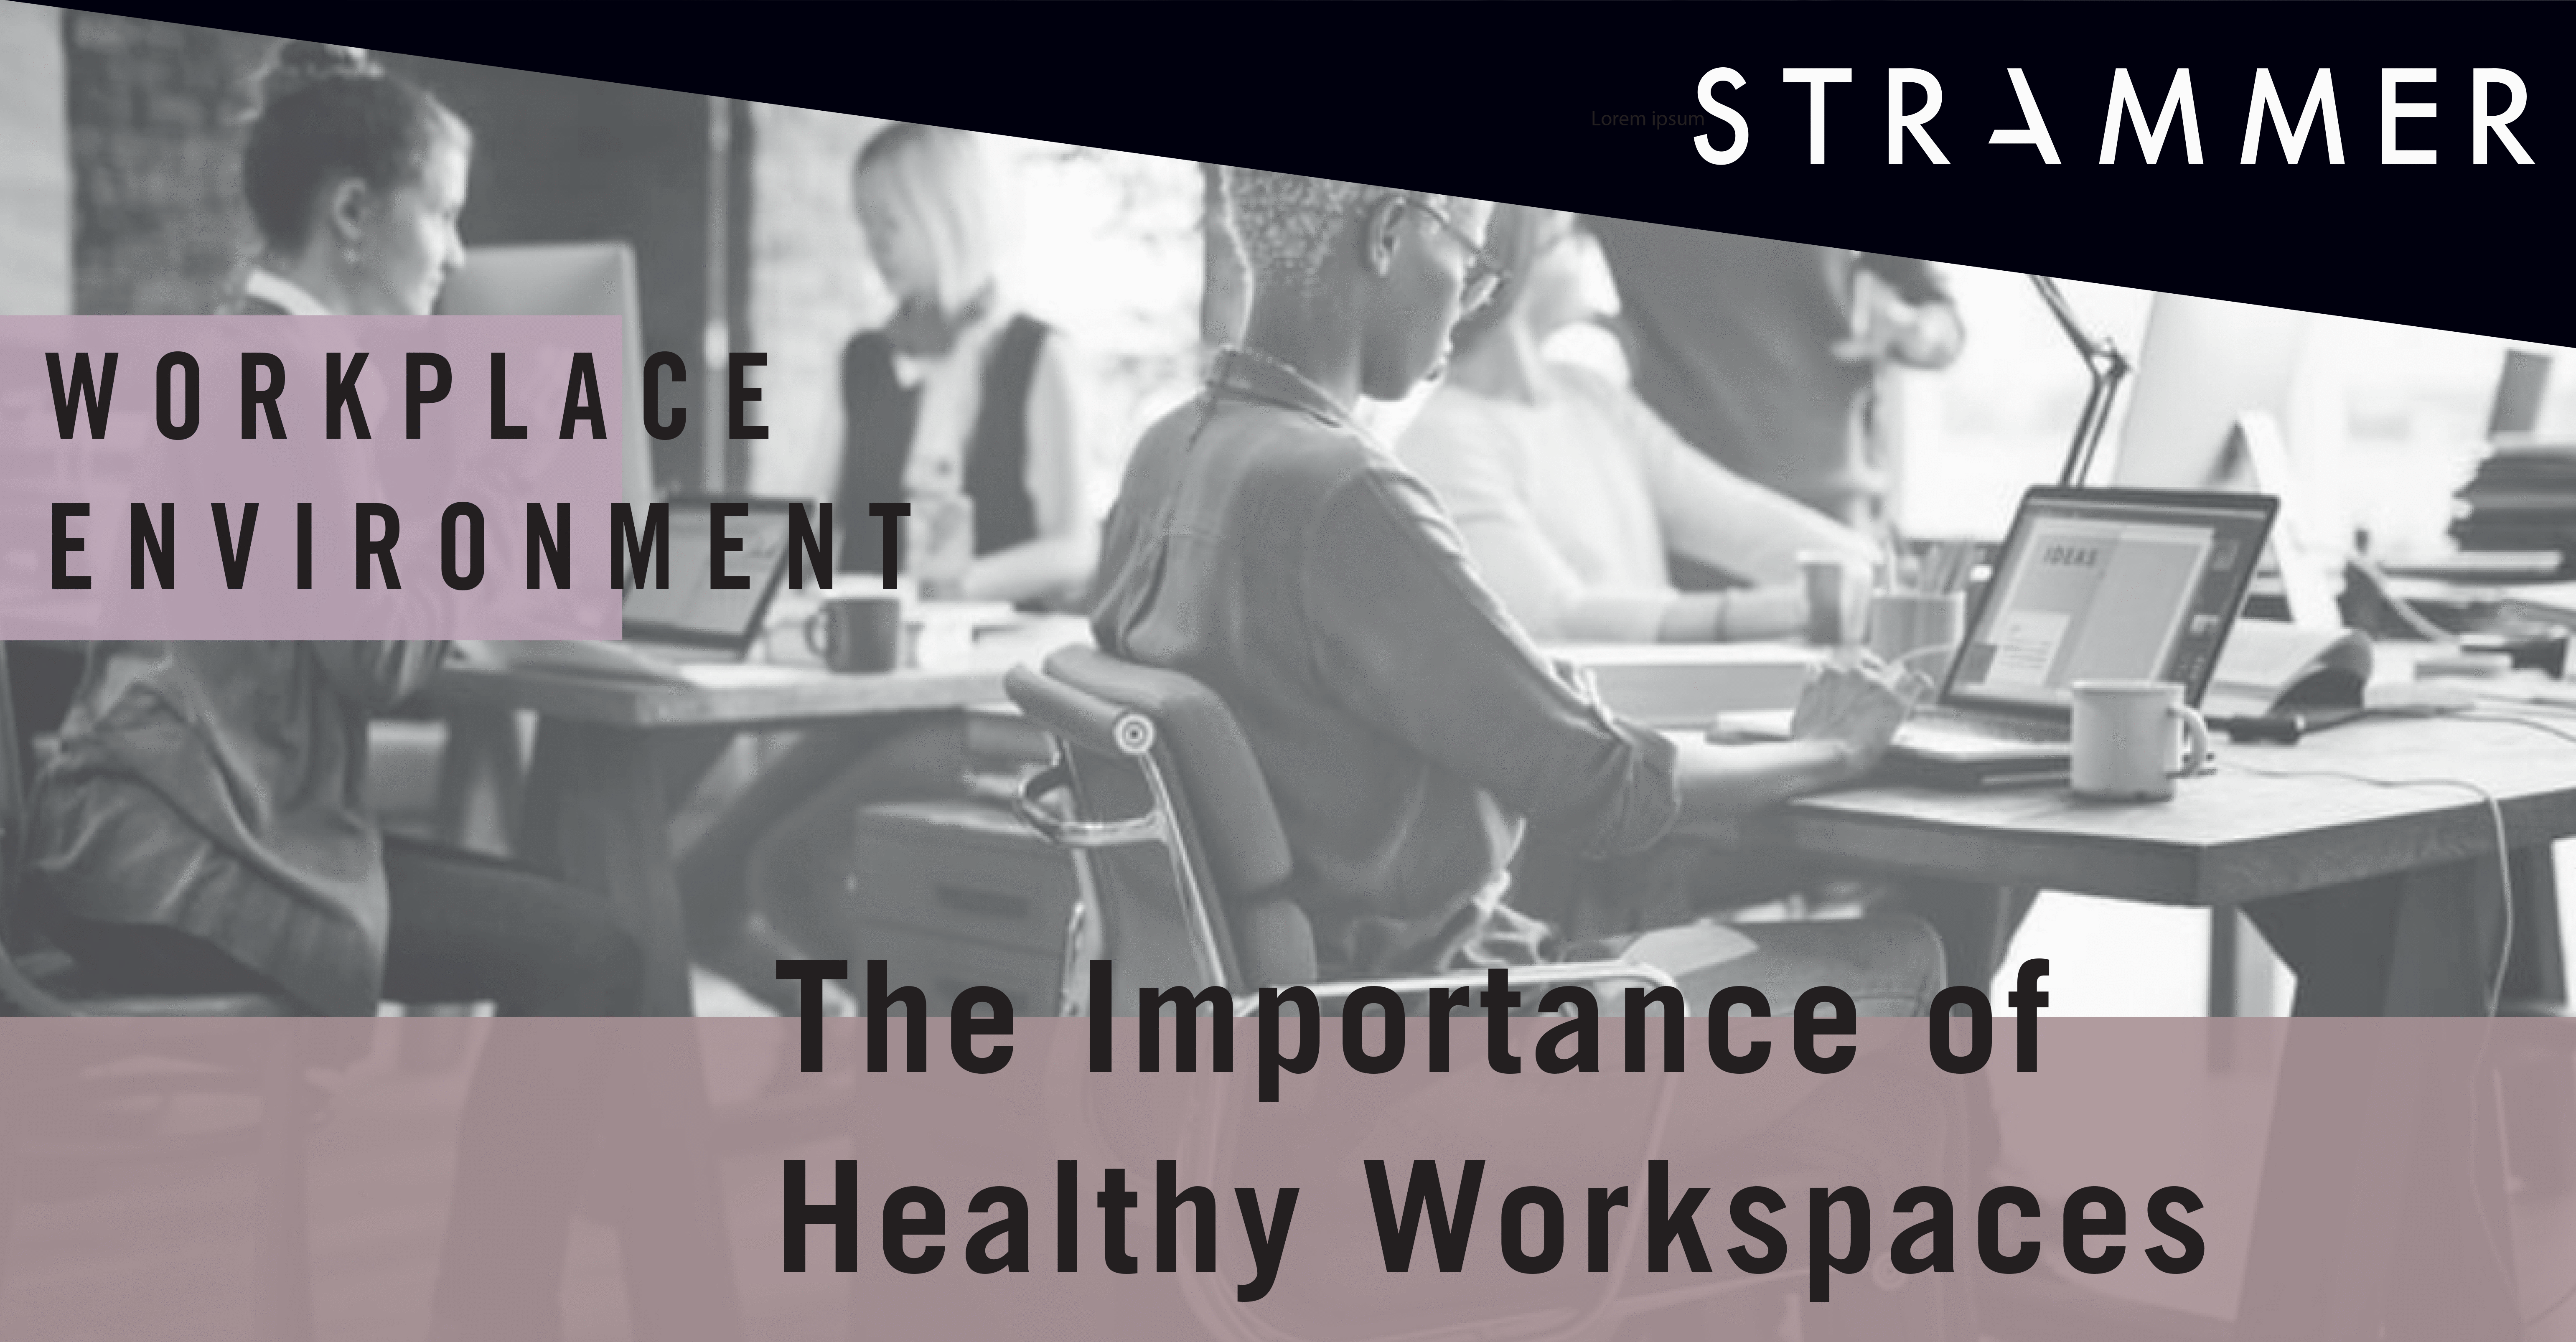 Healthy workplace